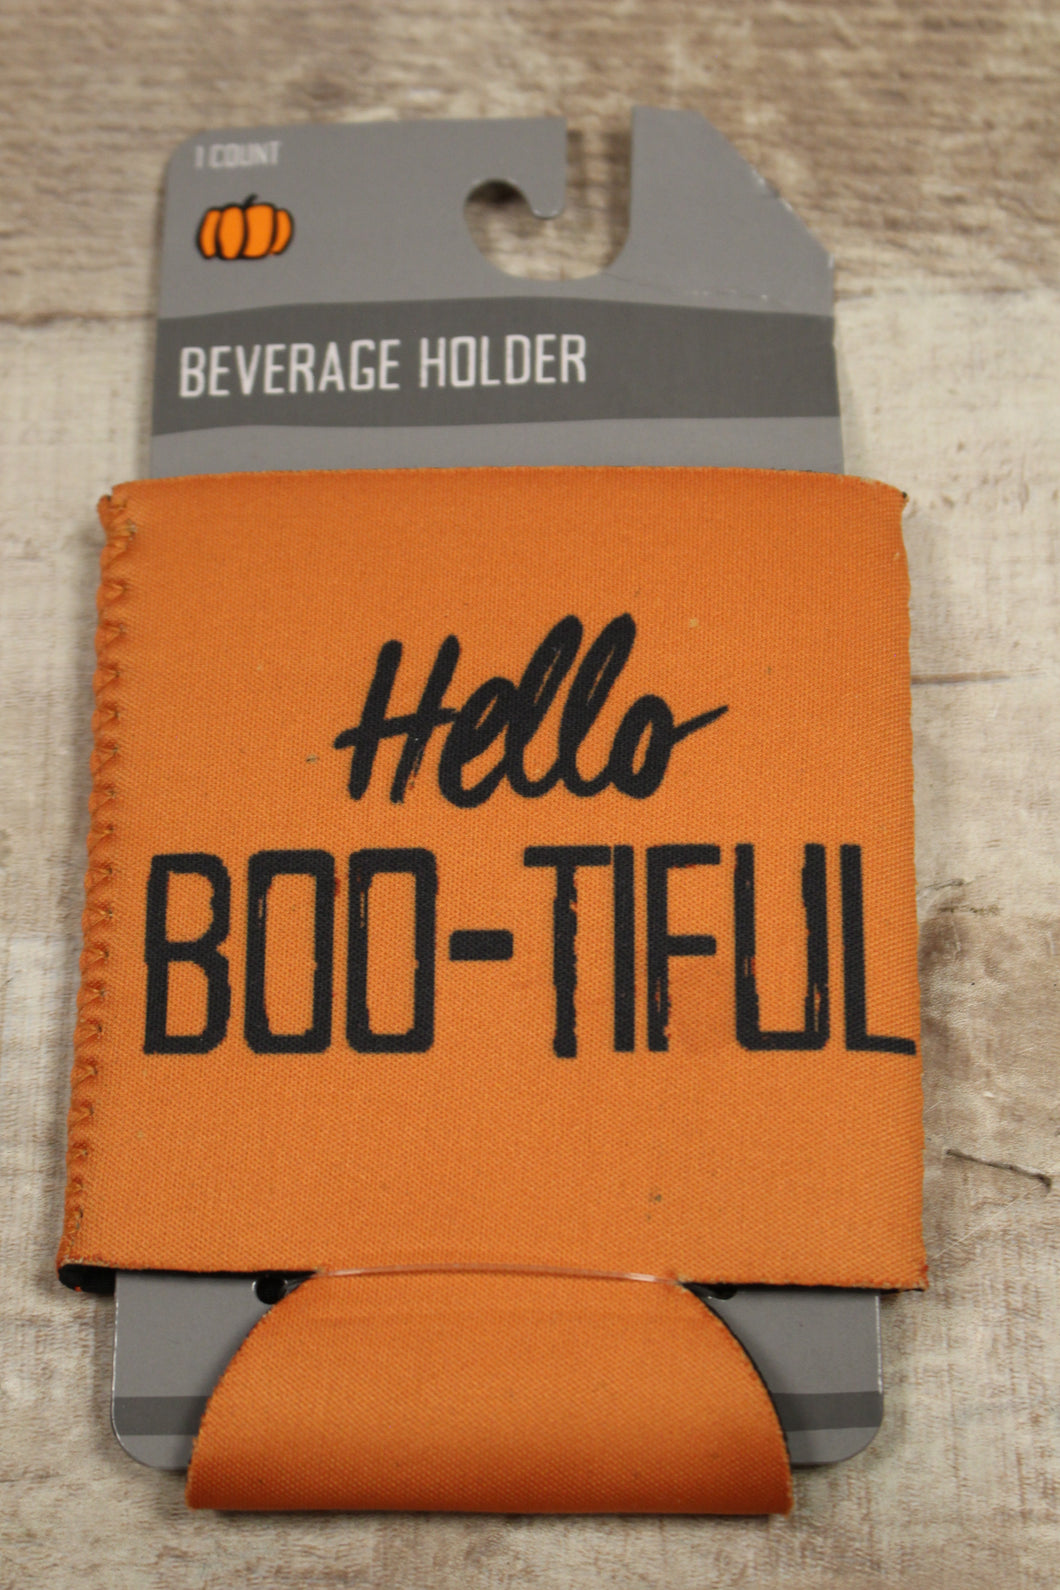 Halloween Hello Boo-Tiful Beverage Soft Holder Koozie - New – Military  Steals and Surplus